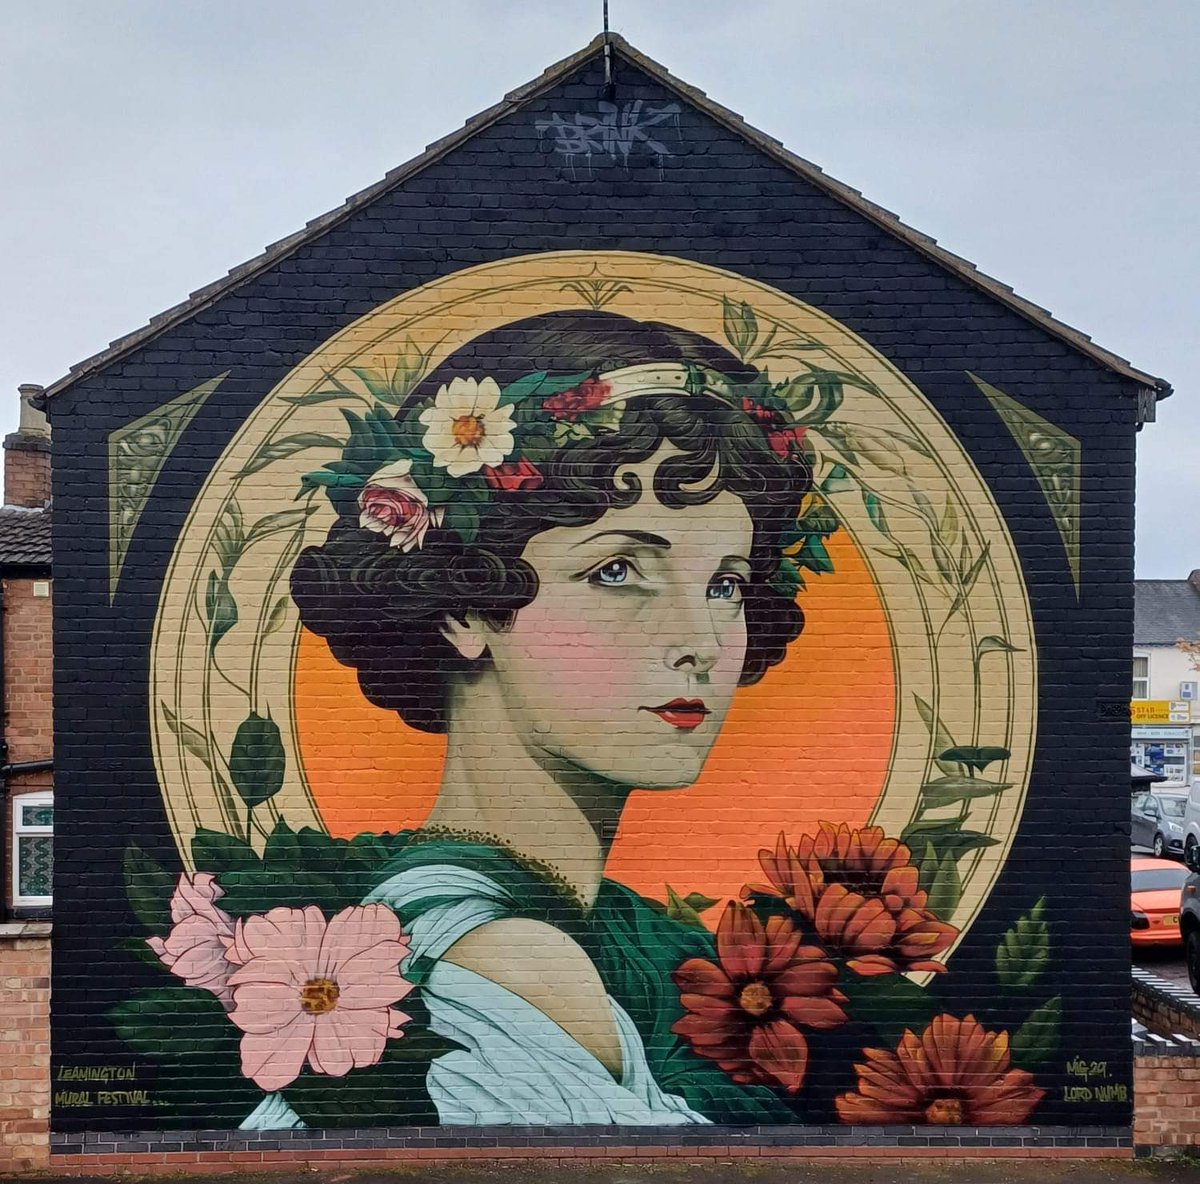 Mig29 & Lord Numb take on their biggest mural challenge so far with this Art Nouveau style portrait for Leamington Mural Festival 2024.
A huge thank you to Art Friends Warwickshire for supporting this project!

#leamingtonspa #loveleam #muralfestival #mural #art #artnouveau